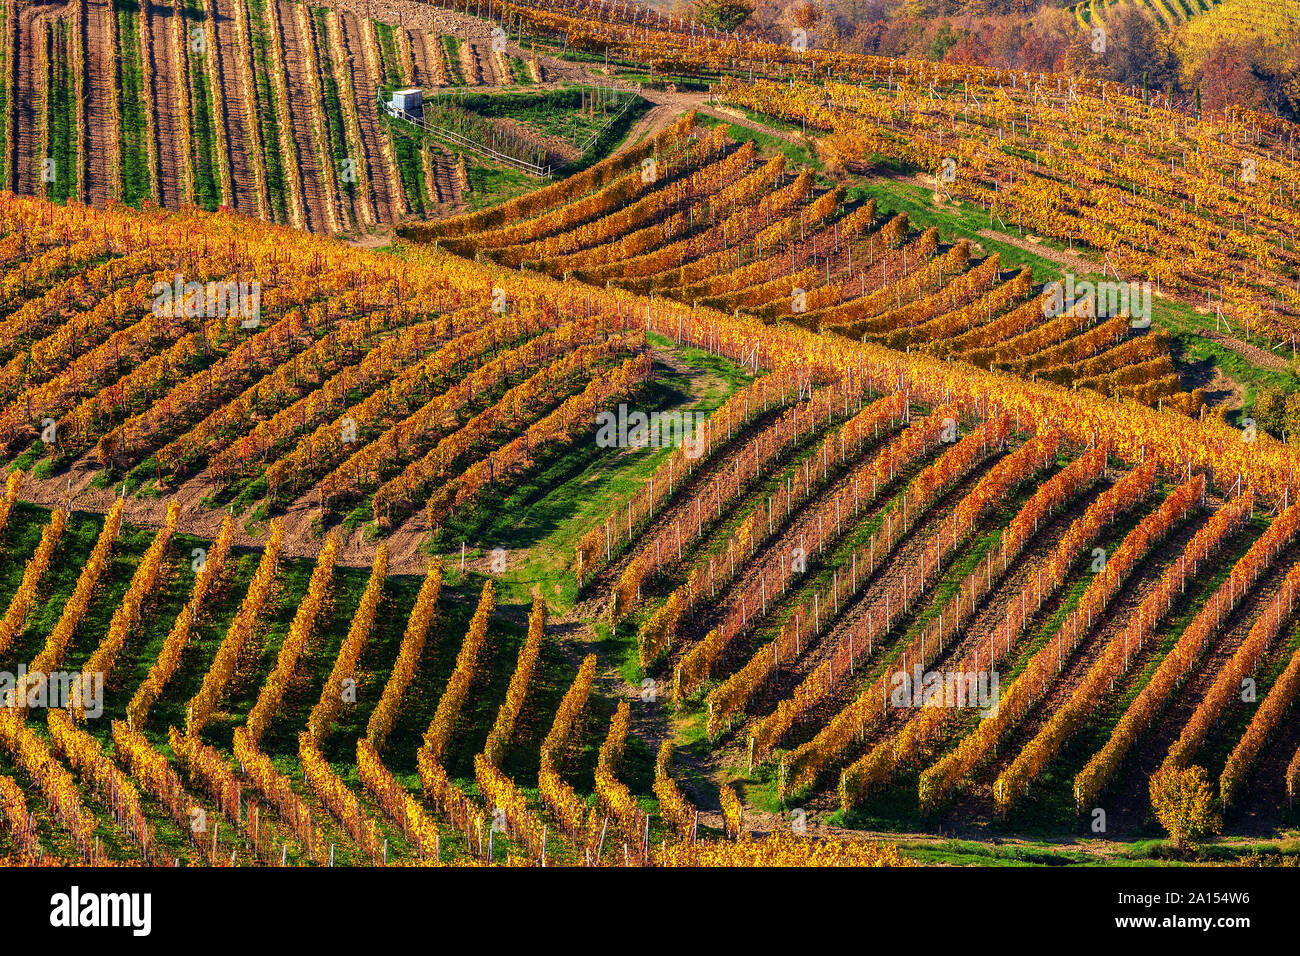 View of colorful autumnal vineyards on the hills of Langhe region in Piedmont, Northern Italy. Stock Photo